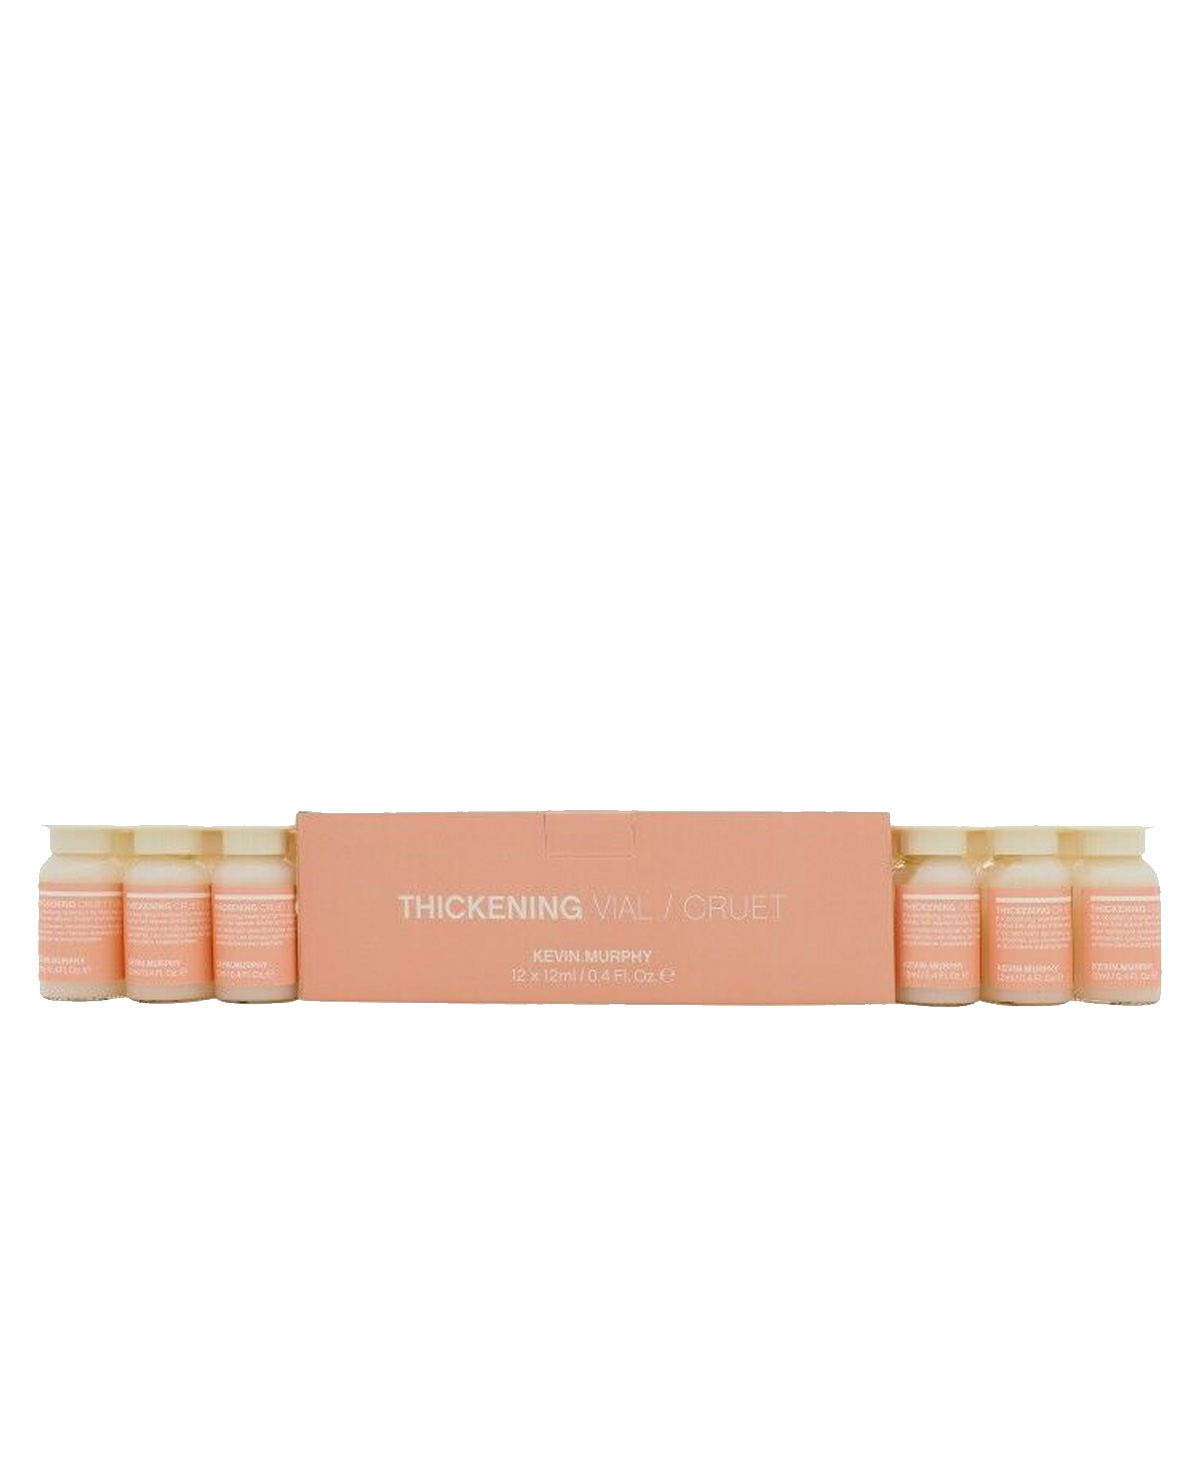 Kevin.Murphy THICKENING VIAL 12ml (12 pc in box)